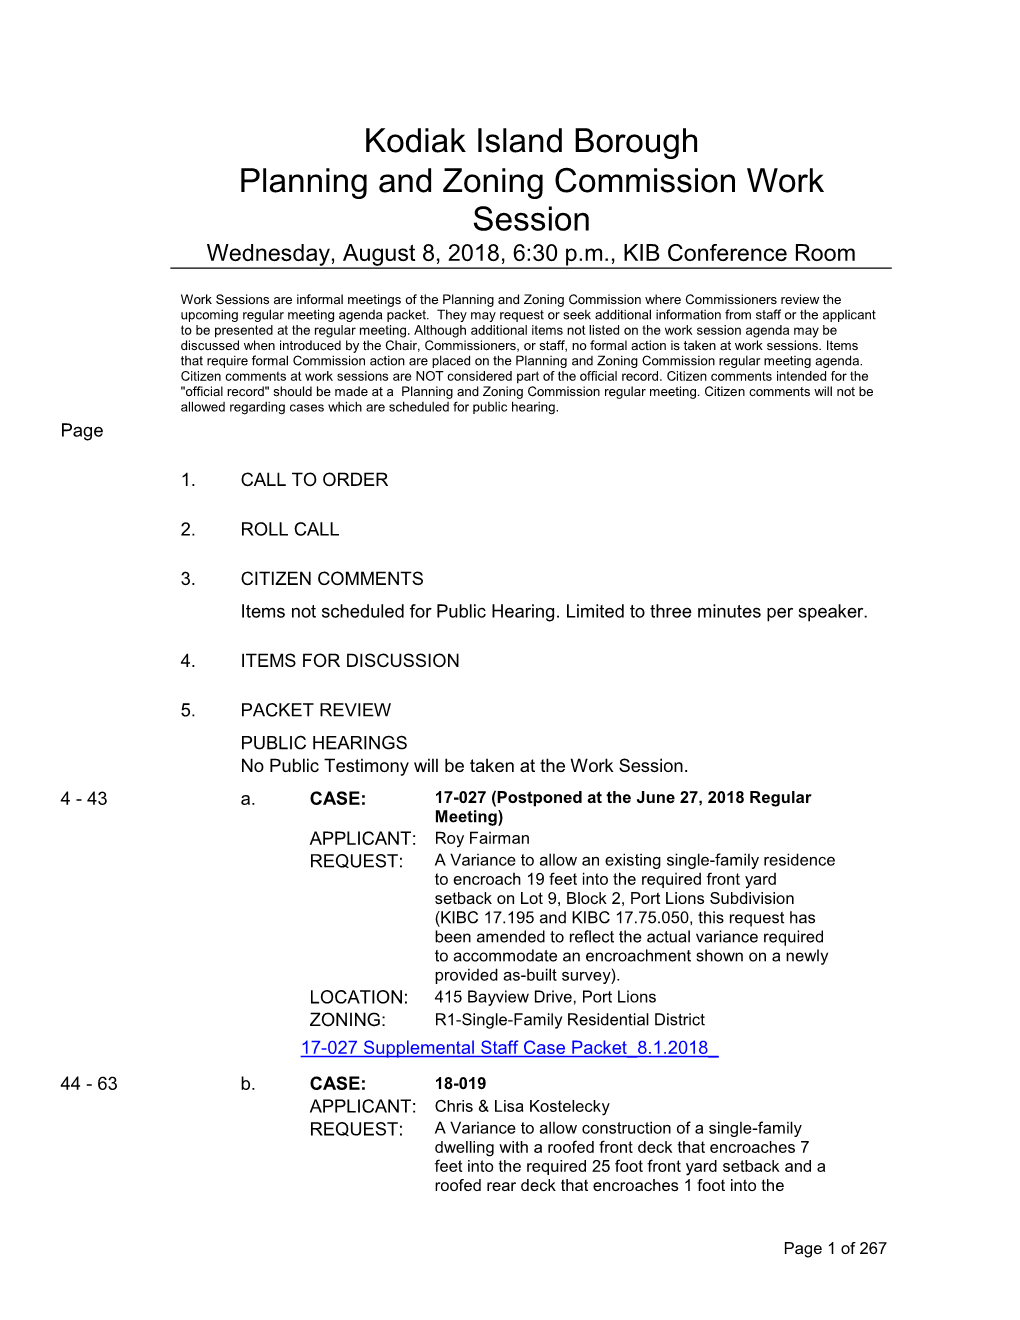 Planning and Zoning Commission Work Session Wednesday, August 8, 2018, 6:30 P.M., KIB Conference Room